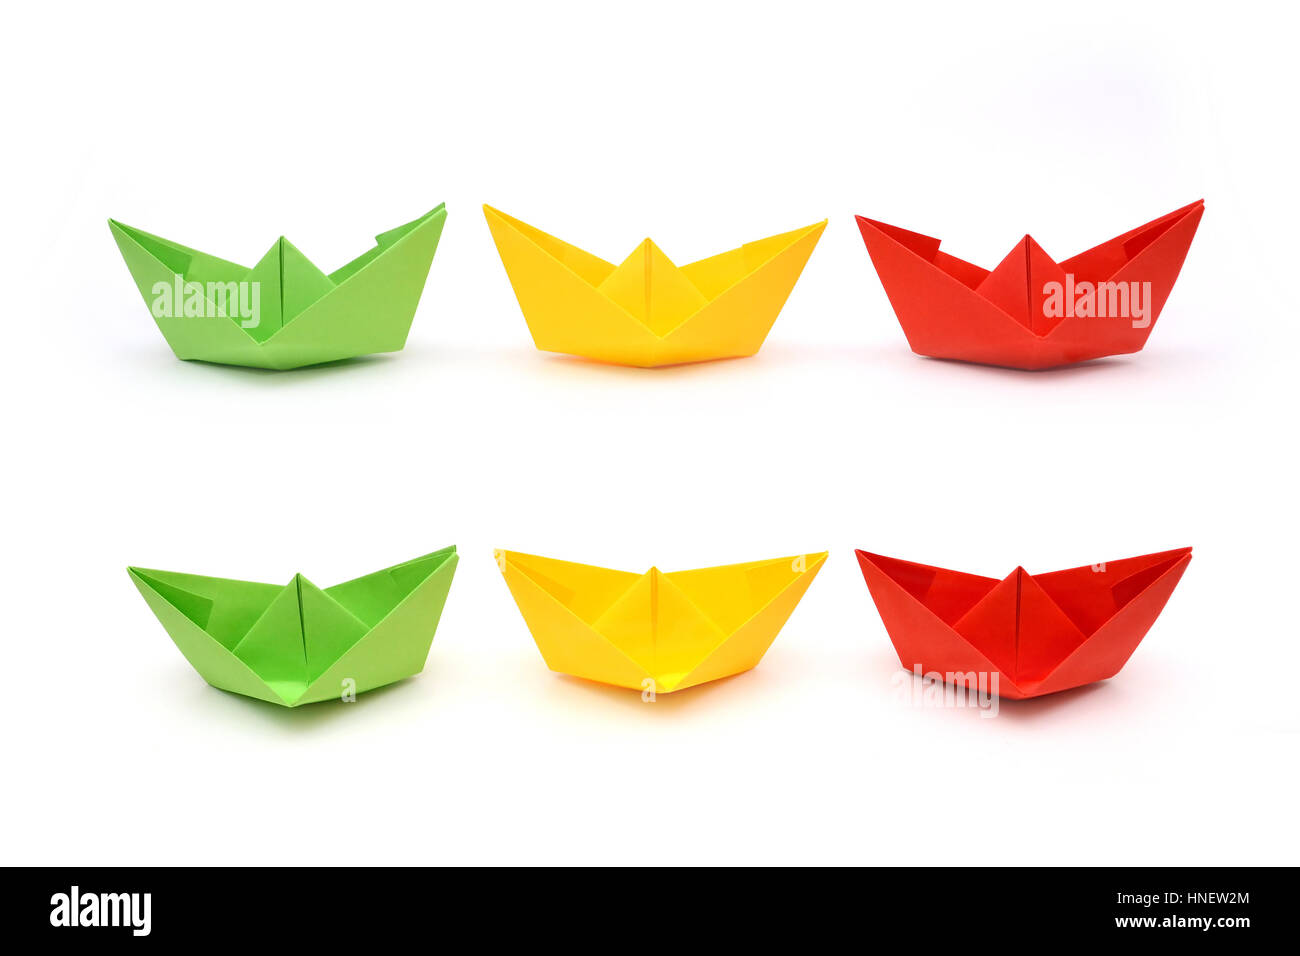 Colored paper boats, origami. Green, yellow and red paper Stock Photo